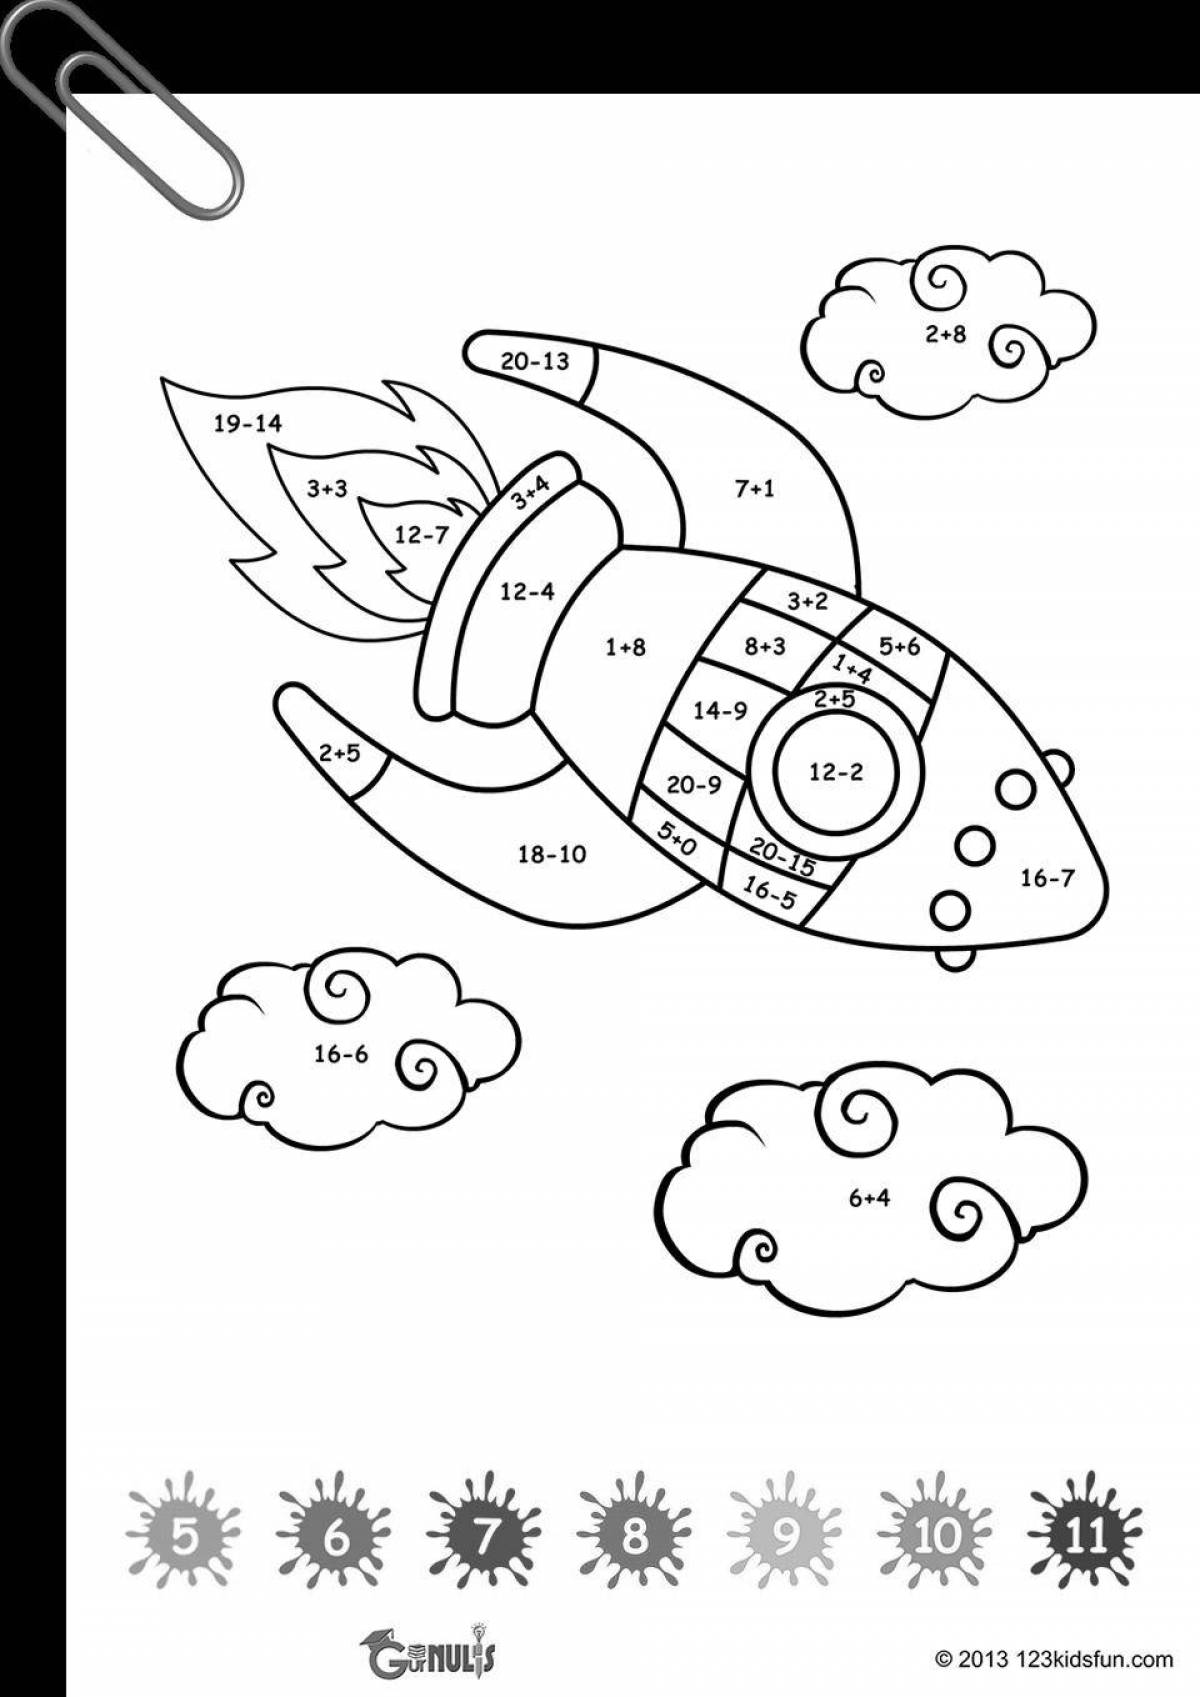 Awesome space game coloring page